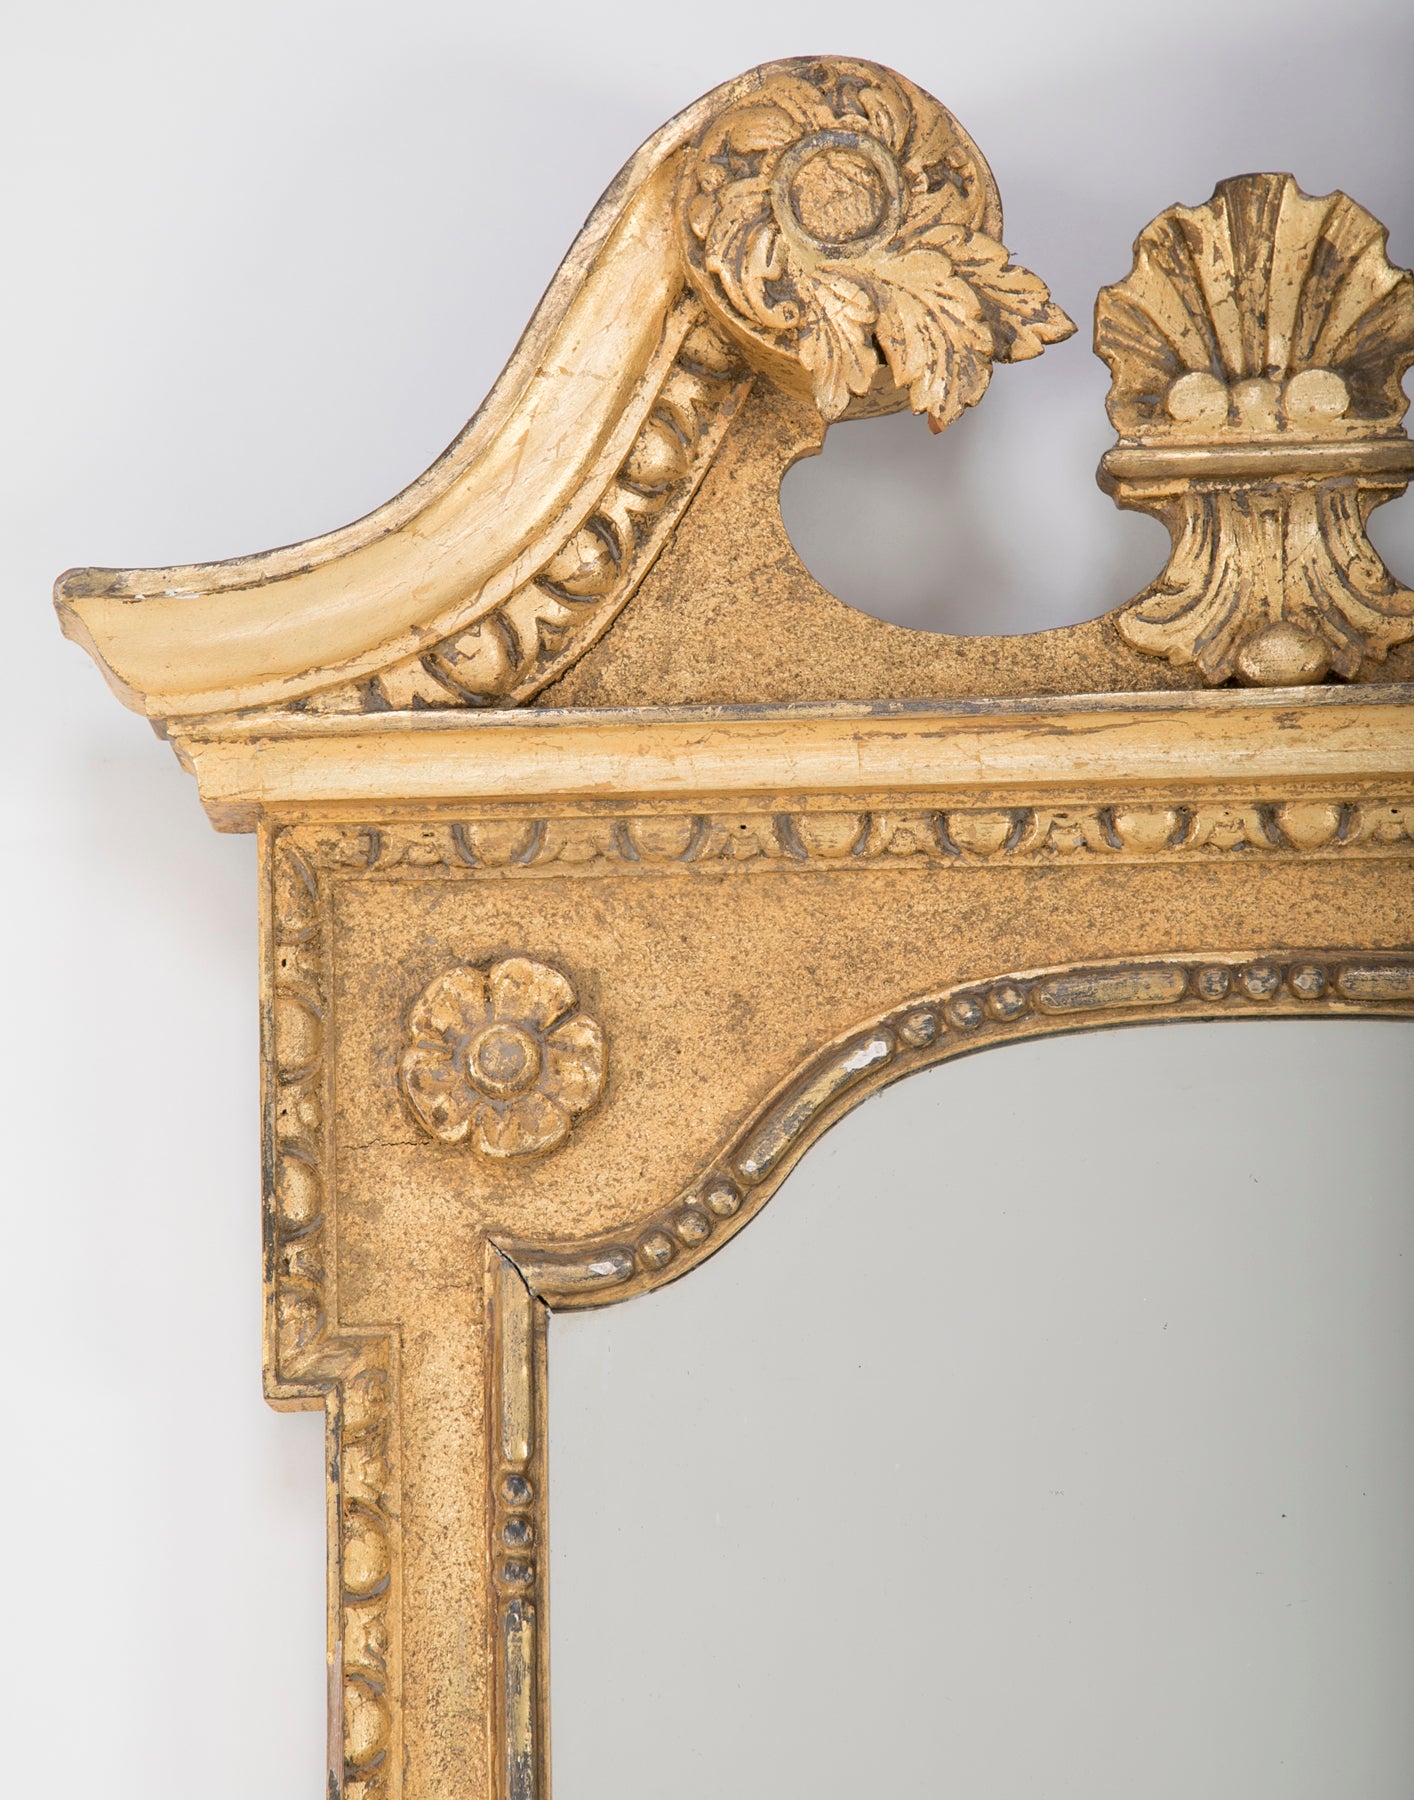 George II Period Carved & Gilded Gesso Looking Glass